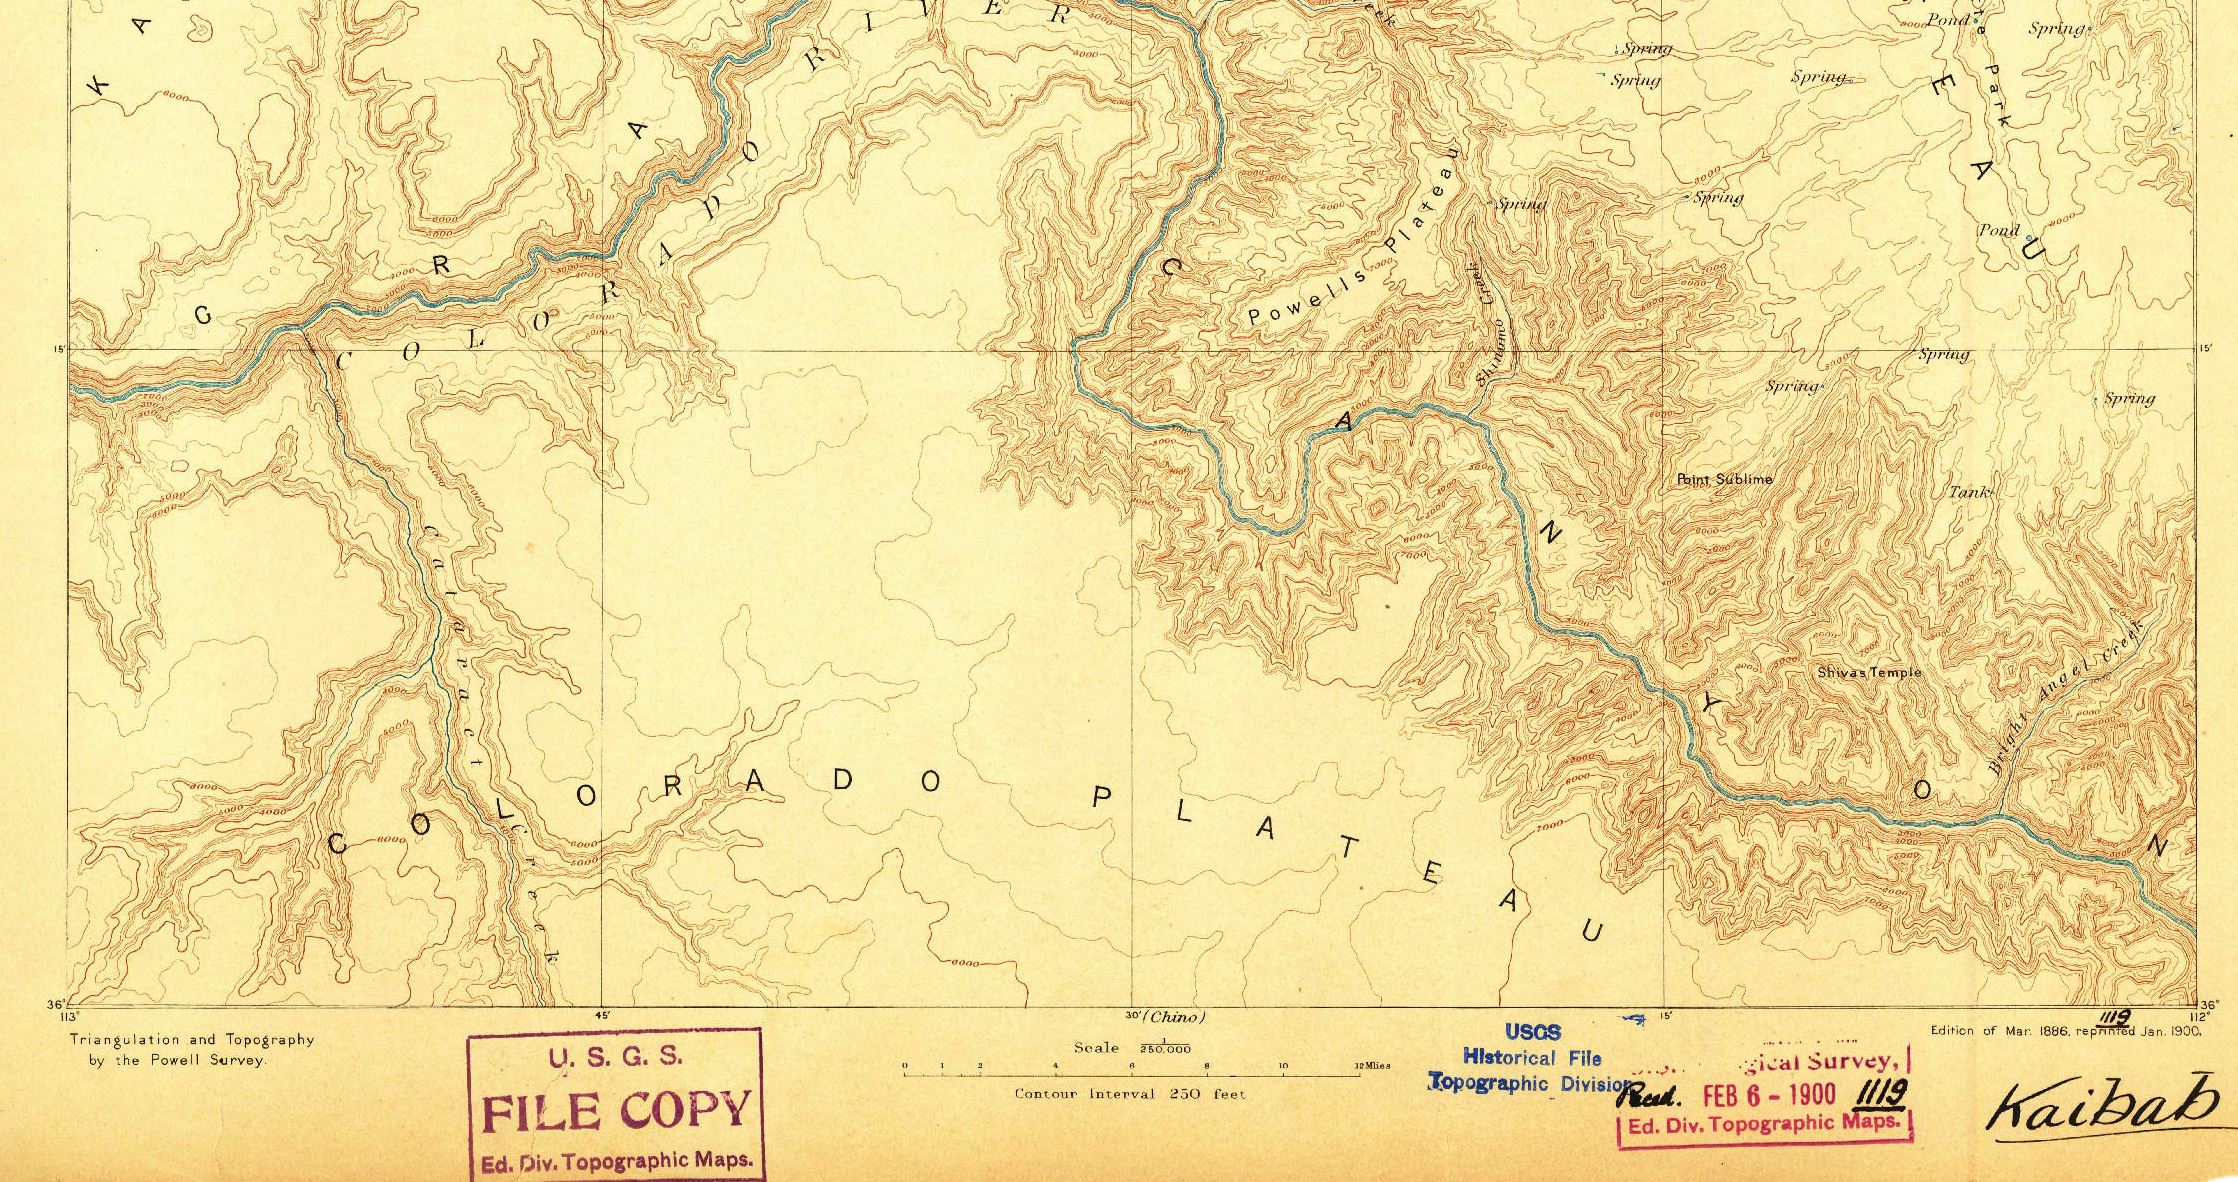 Image of topographic map of the Grand Canyon.